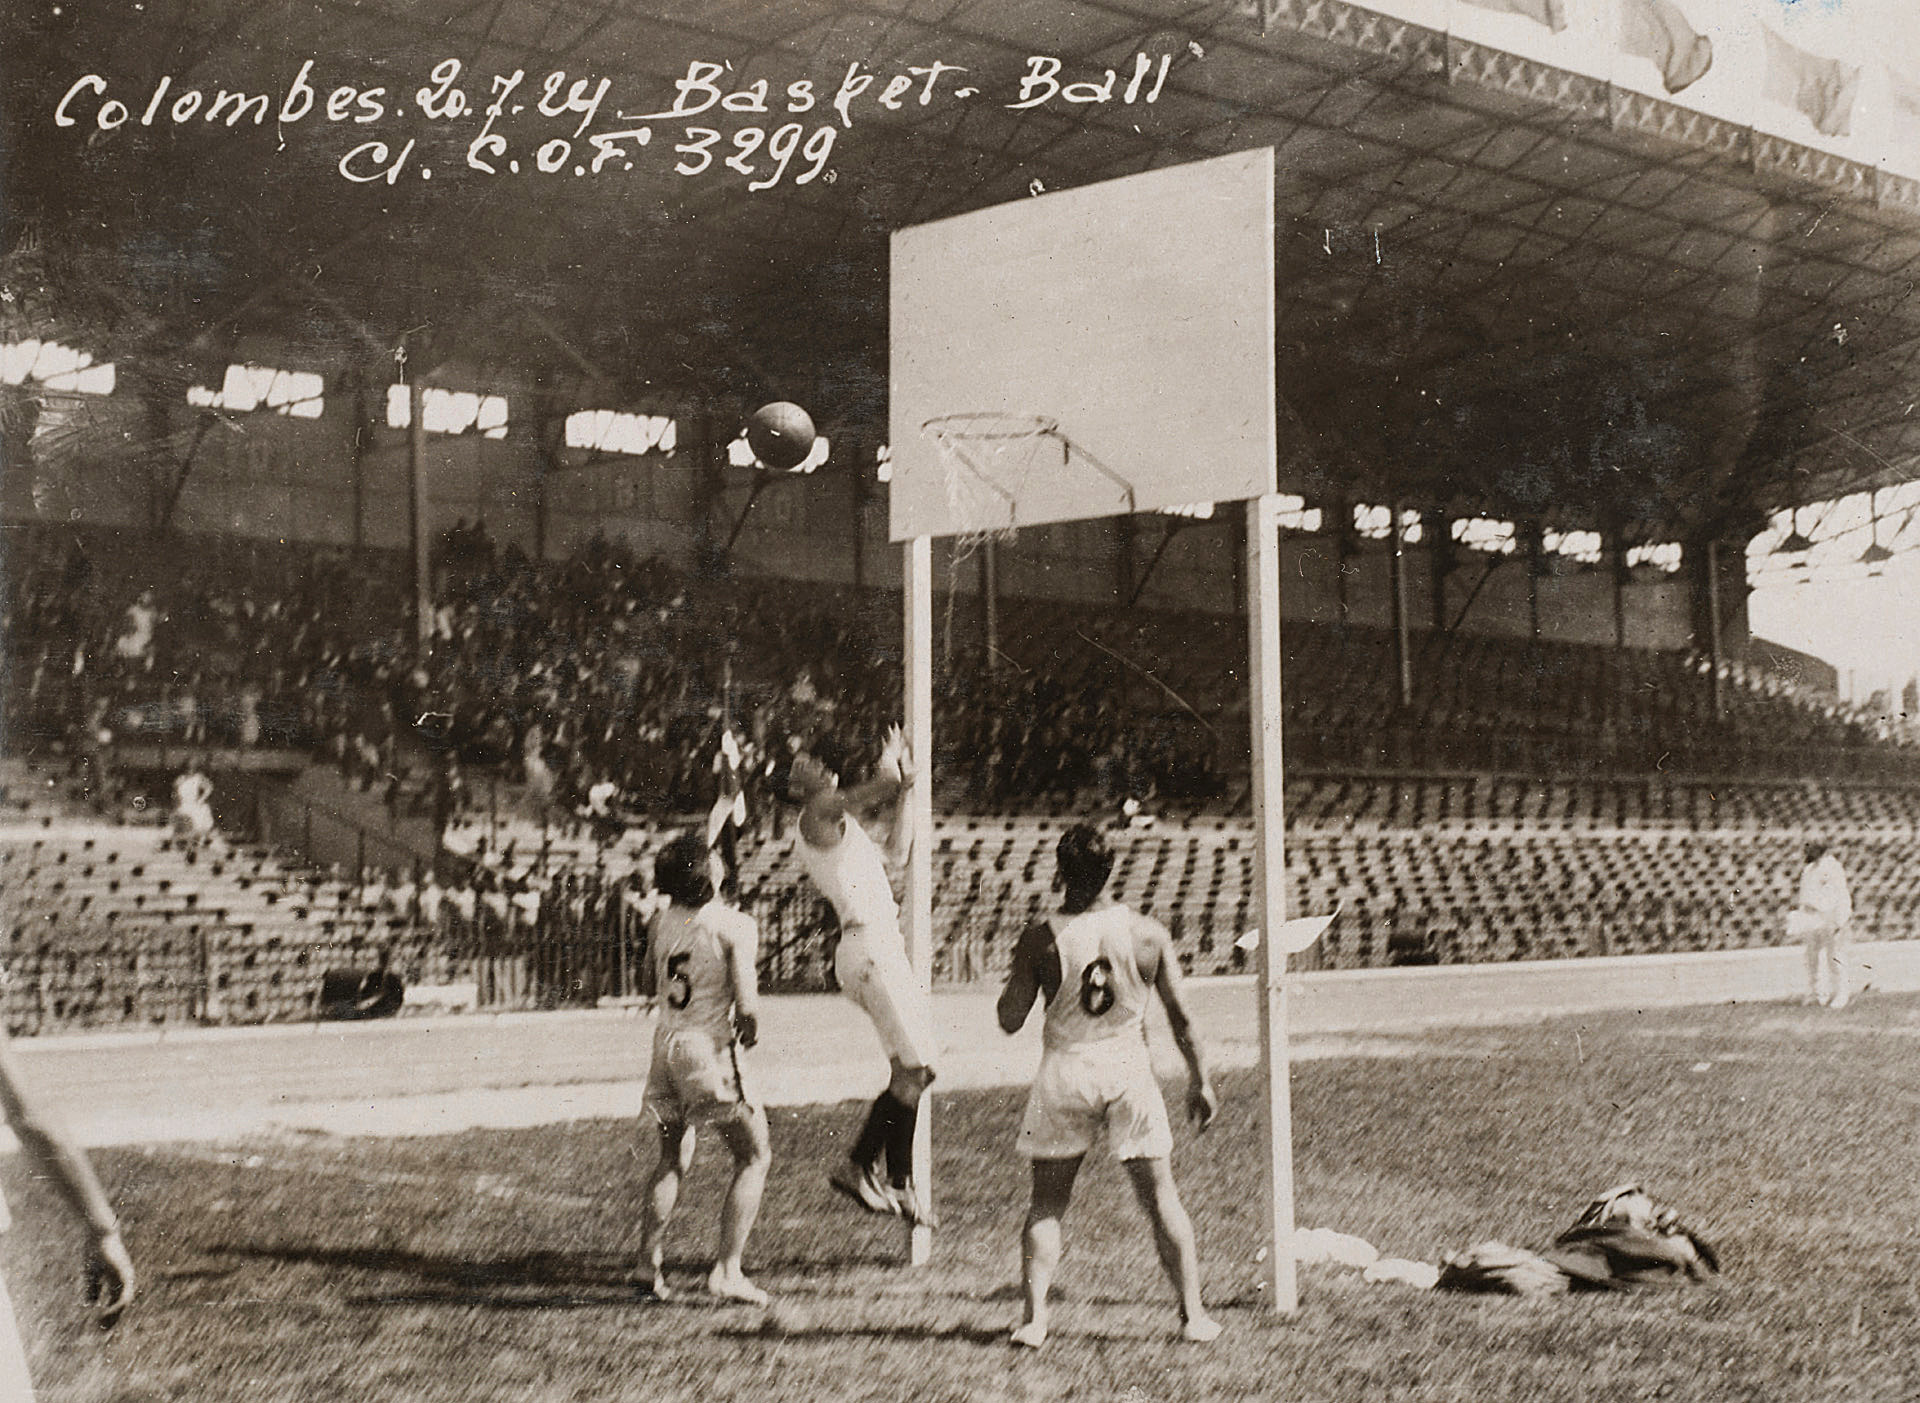 Paris 1924 Olympic Games (Olympic Stadium, Colombes, 20 July 1924): Athletes perform a basketball demonstration during childhood matches at the Colombes Olympic stadium. (Photo by Archives CNOSF / Archives CNOSF / CNOSF via AFP)